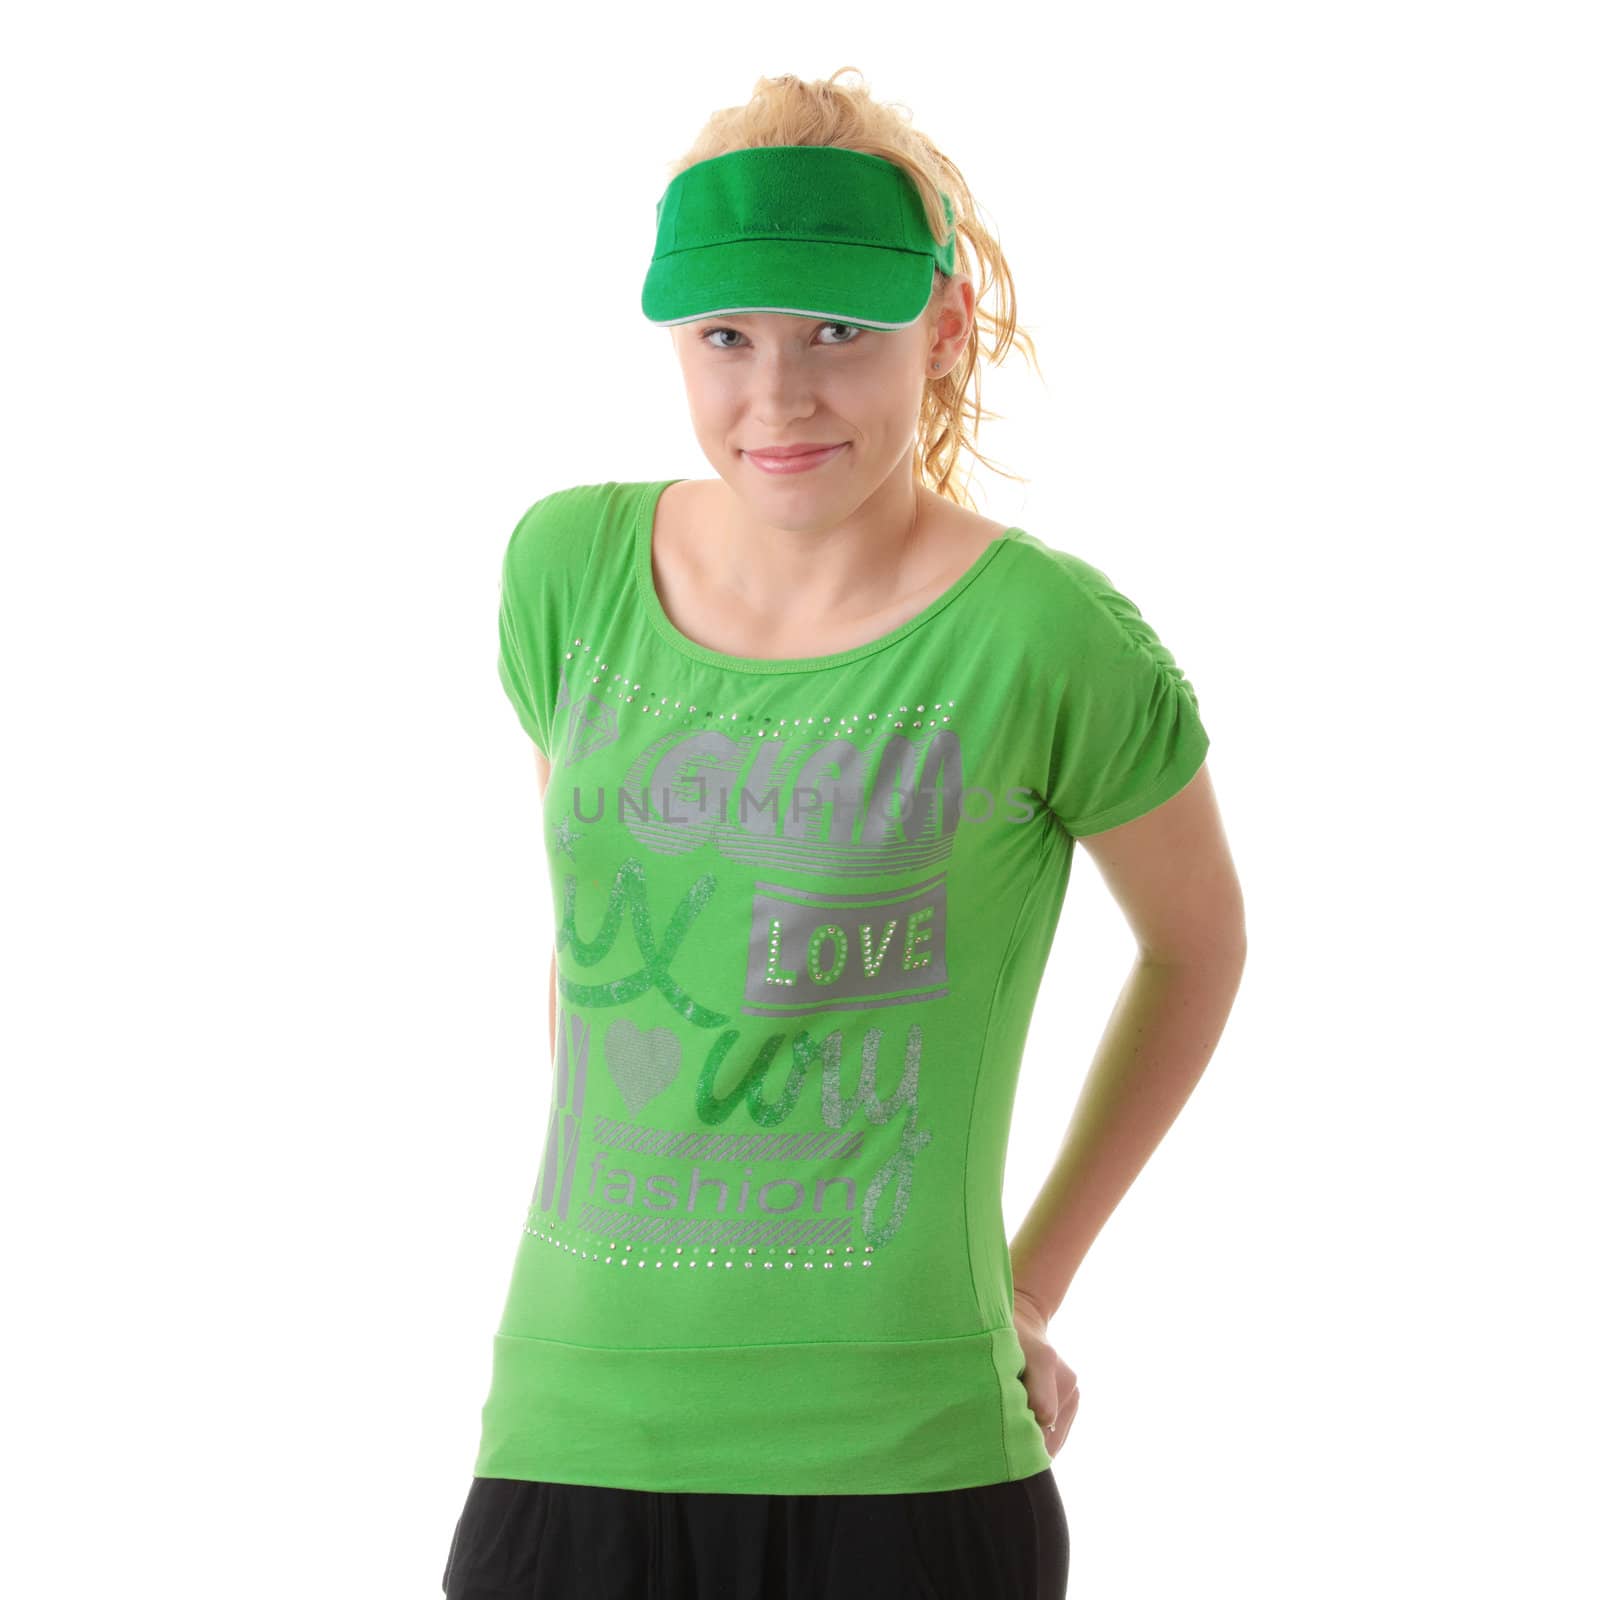 Young beautiful blond woman with green cap by BDS